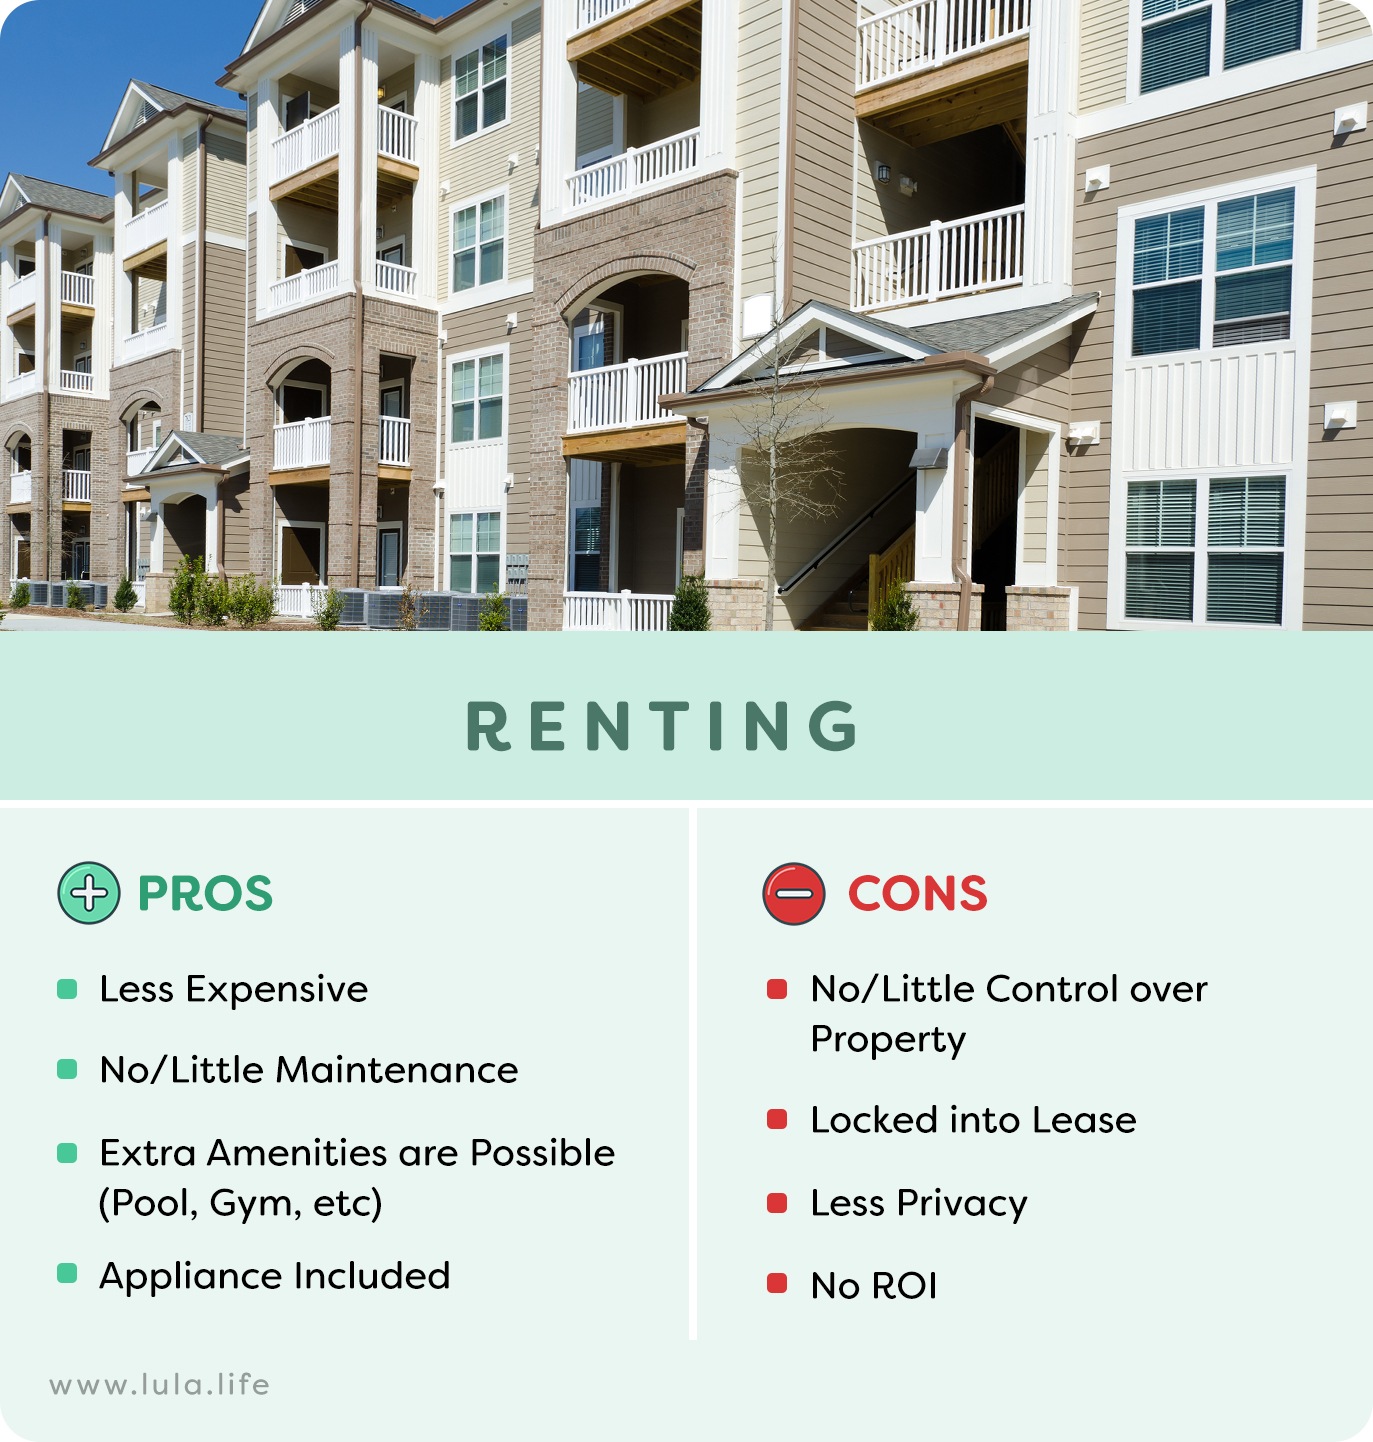 pros and cons of renting infographic